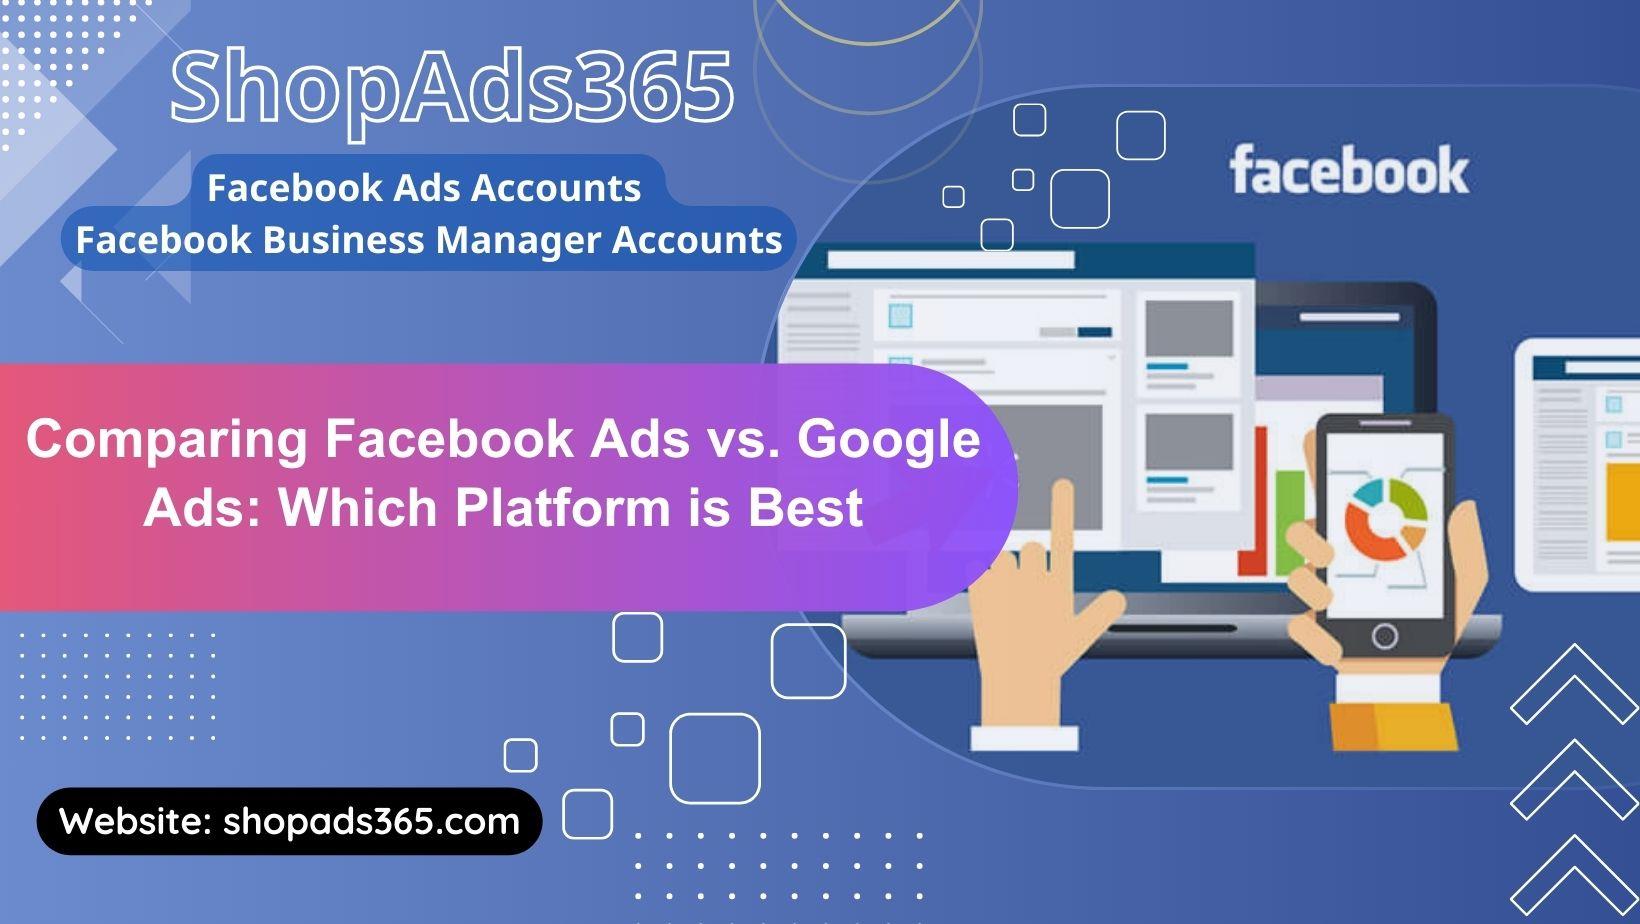 Comparing Facebook Ads vs Google Ads Which Platform is Right for Your Business?